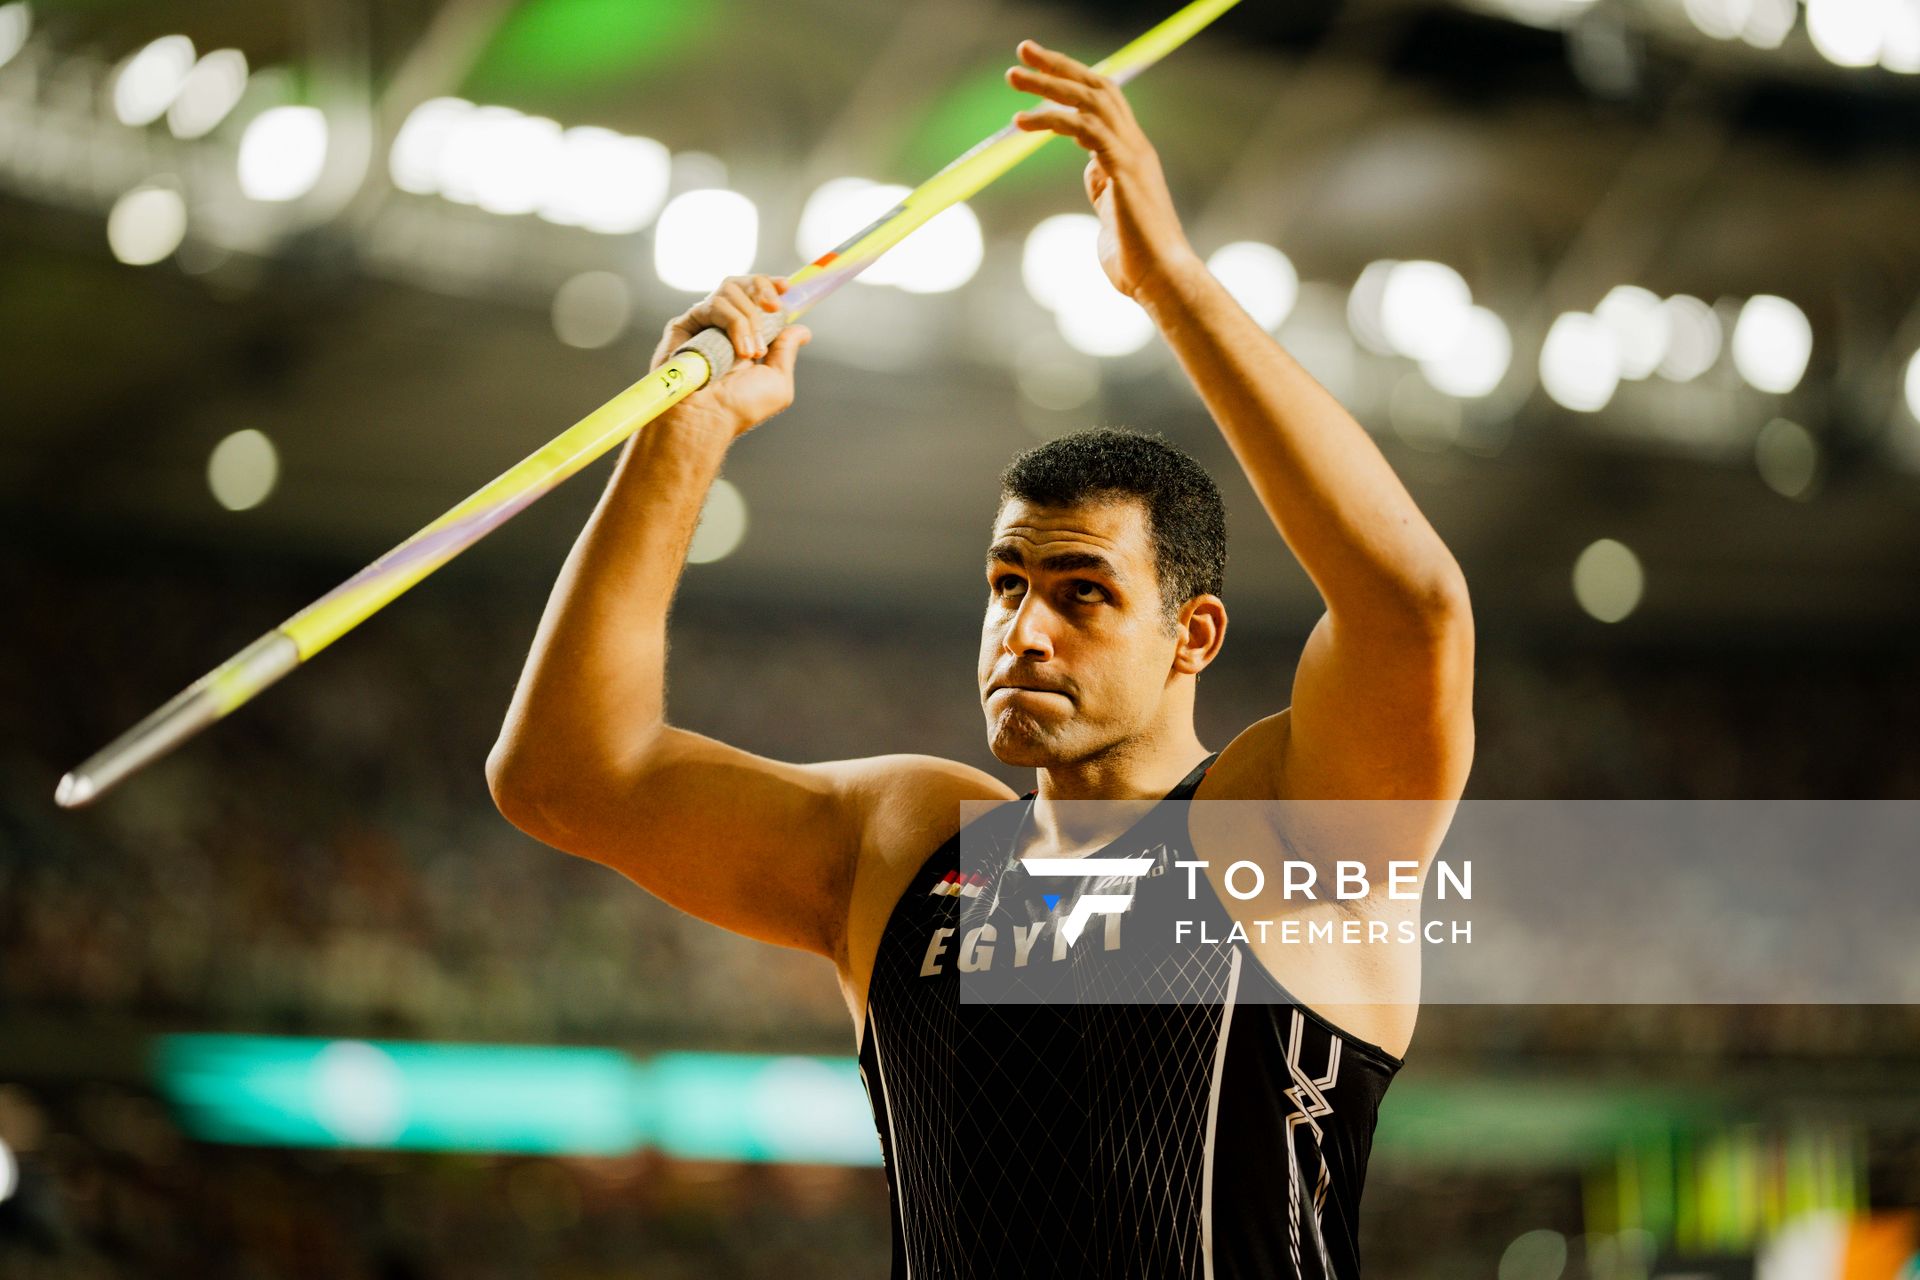 Ihab Abdelrahman (EGY/Egypt) during the Javelin Throw on Day 9 of the World Athletics Championships Budapest 23 at the National Athletics Centre in Budapest, Hungary on August 27, 2023.